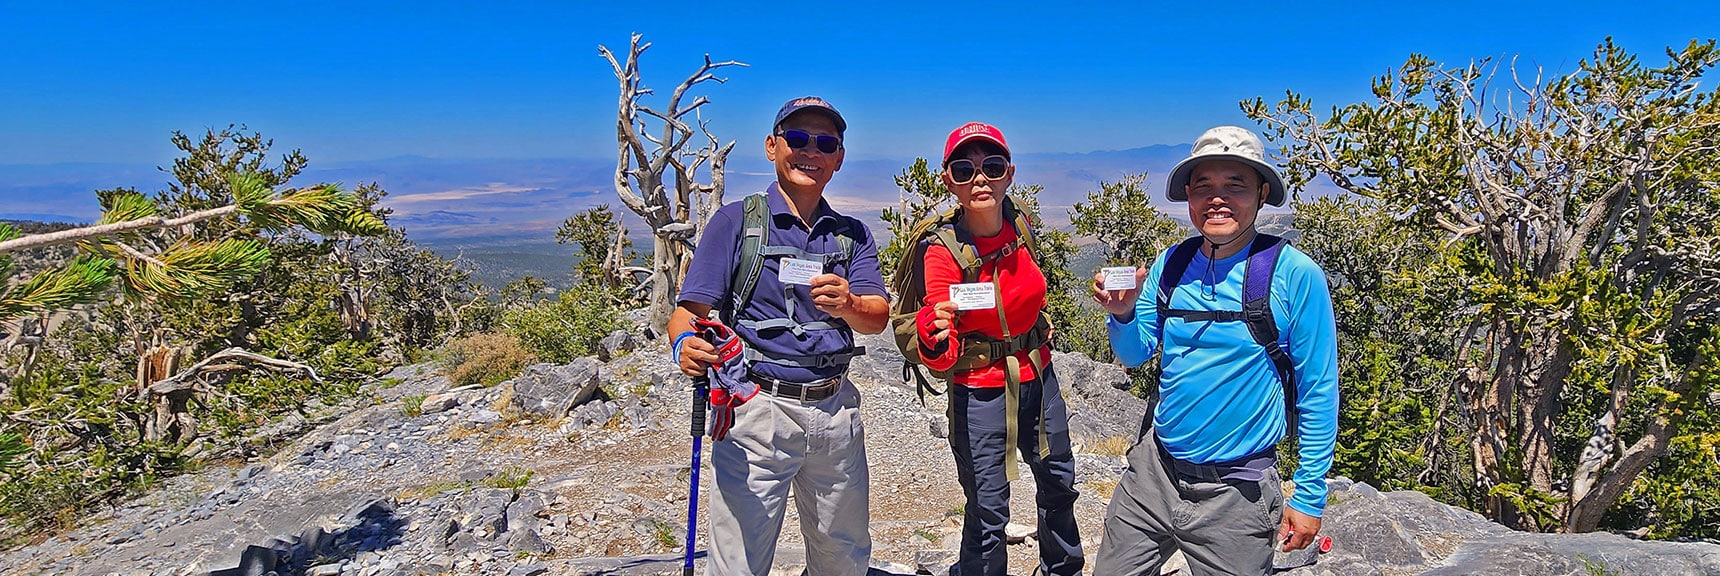 Climbers I Met on Fletcher Peak Summit. They Came by the Traditional Route I Will Descend | Fletcher Canyon / Fletcher Peak / Cockscomb Ridge Circuit | Mt. Charleston Wilderness | Spring Mountains, Nevada